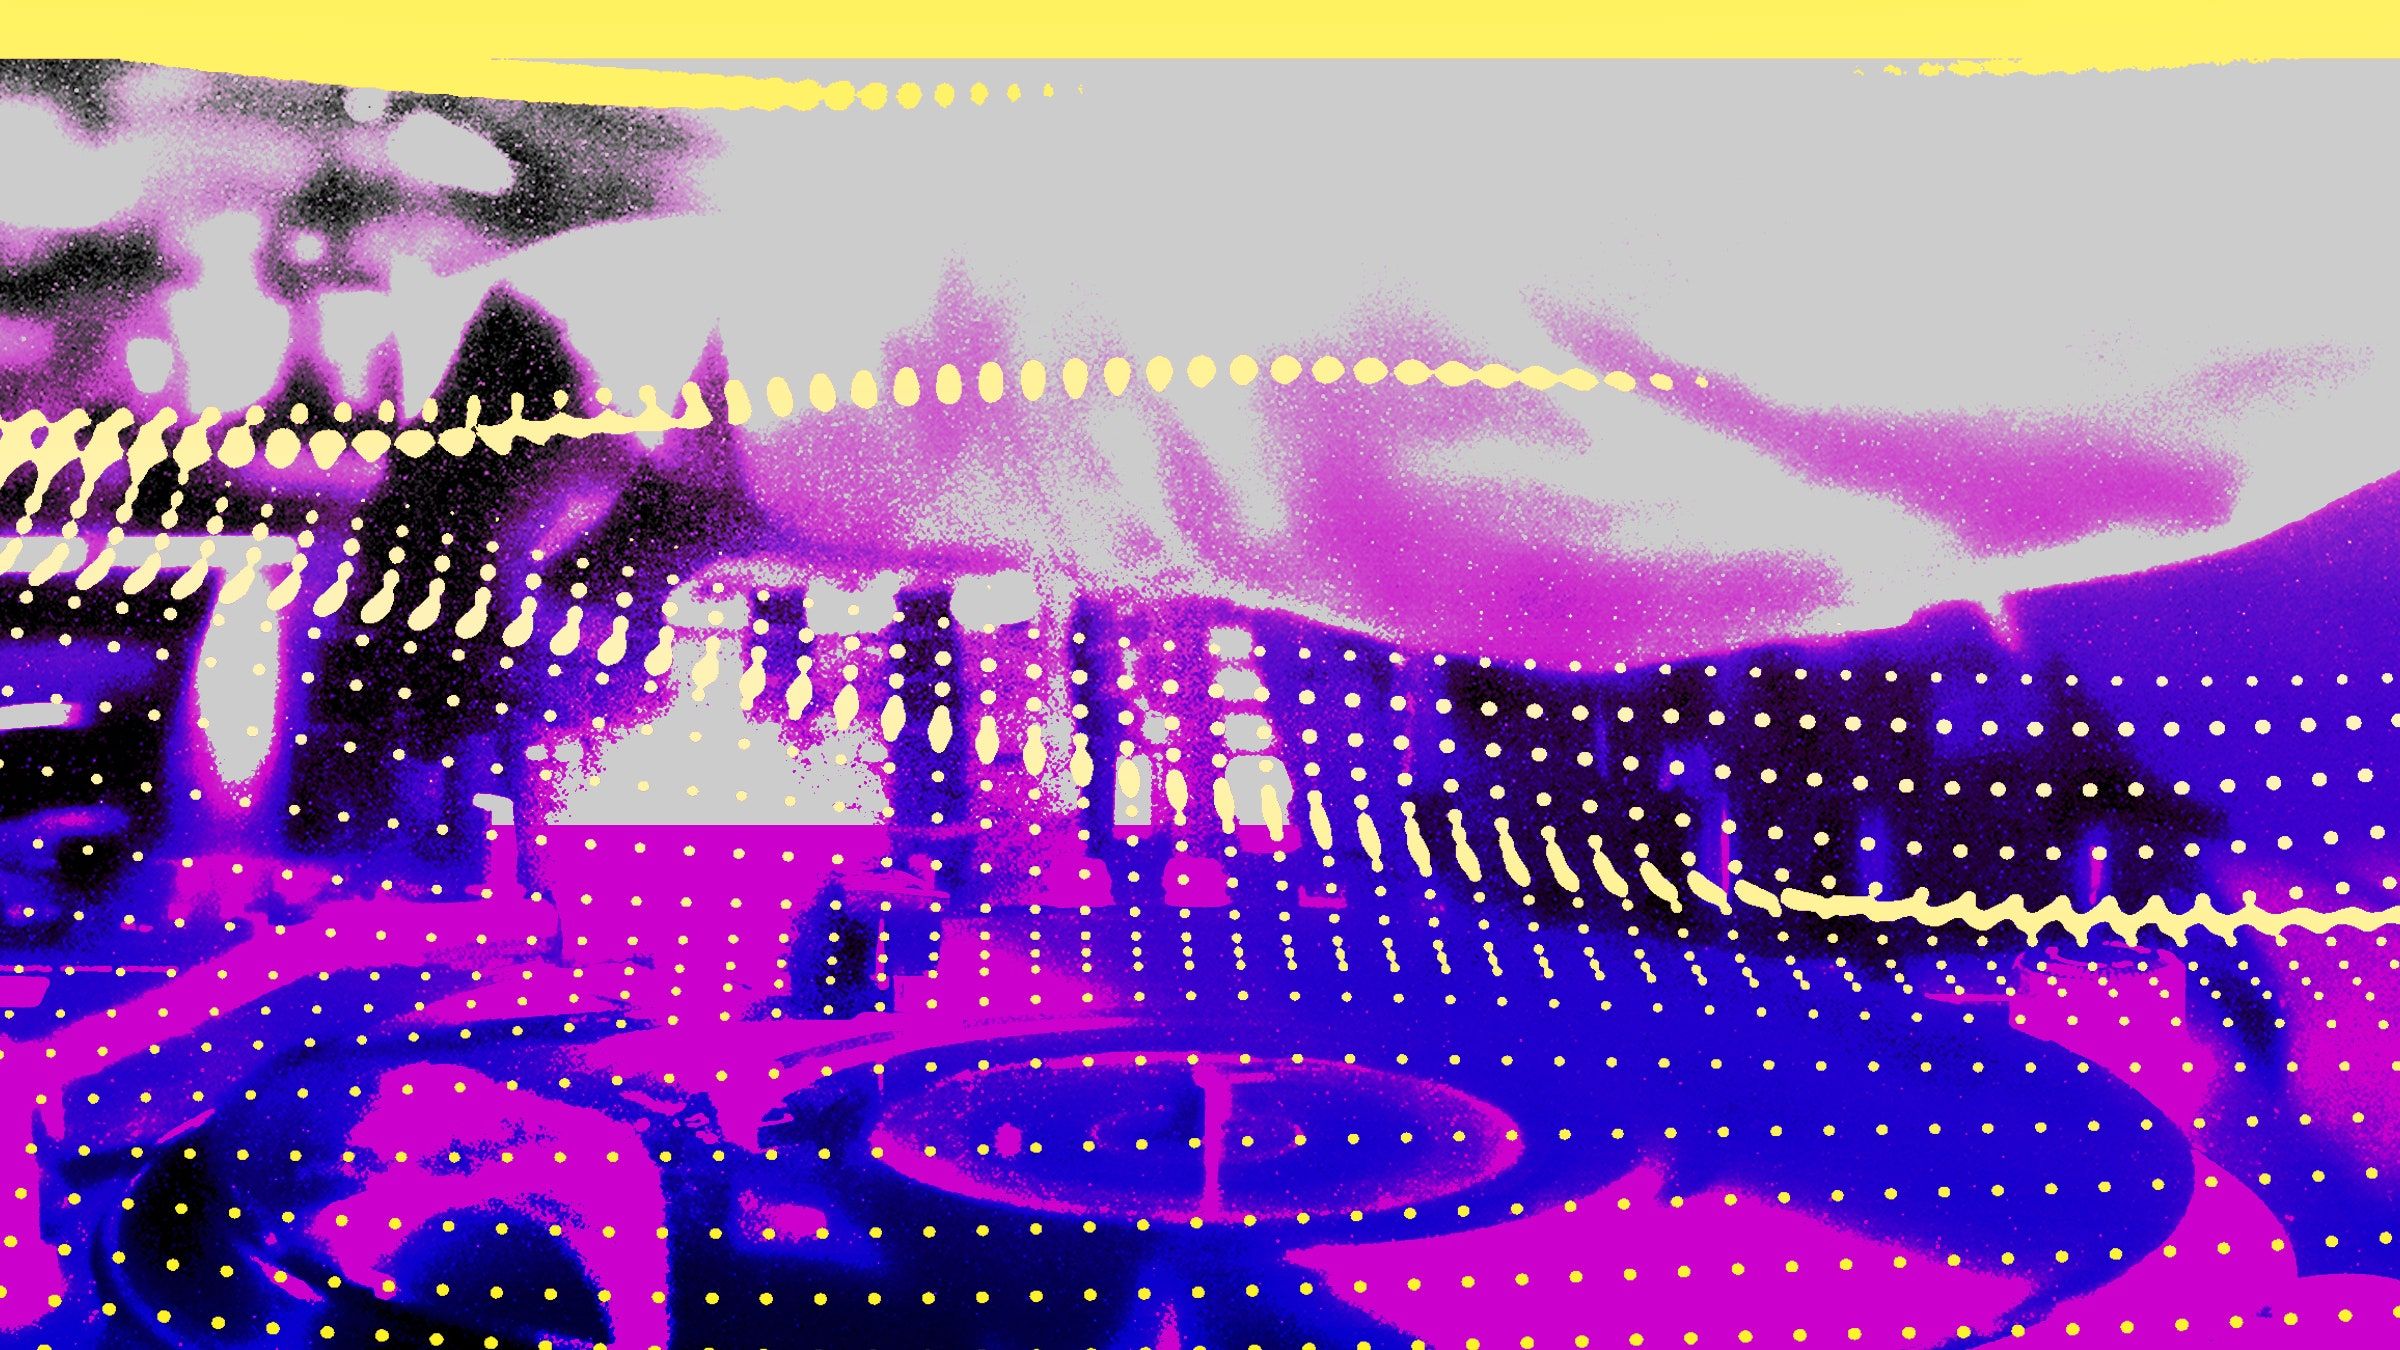 A digital artwork with a yellow, purple and pink gradient - Lo fi